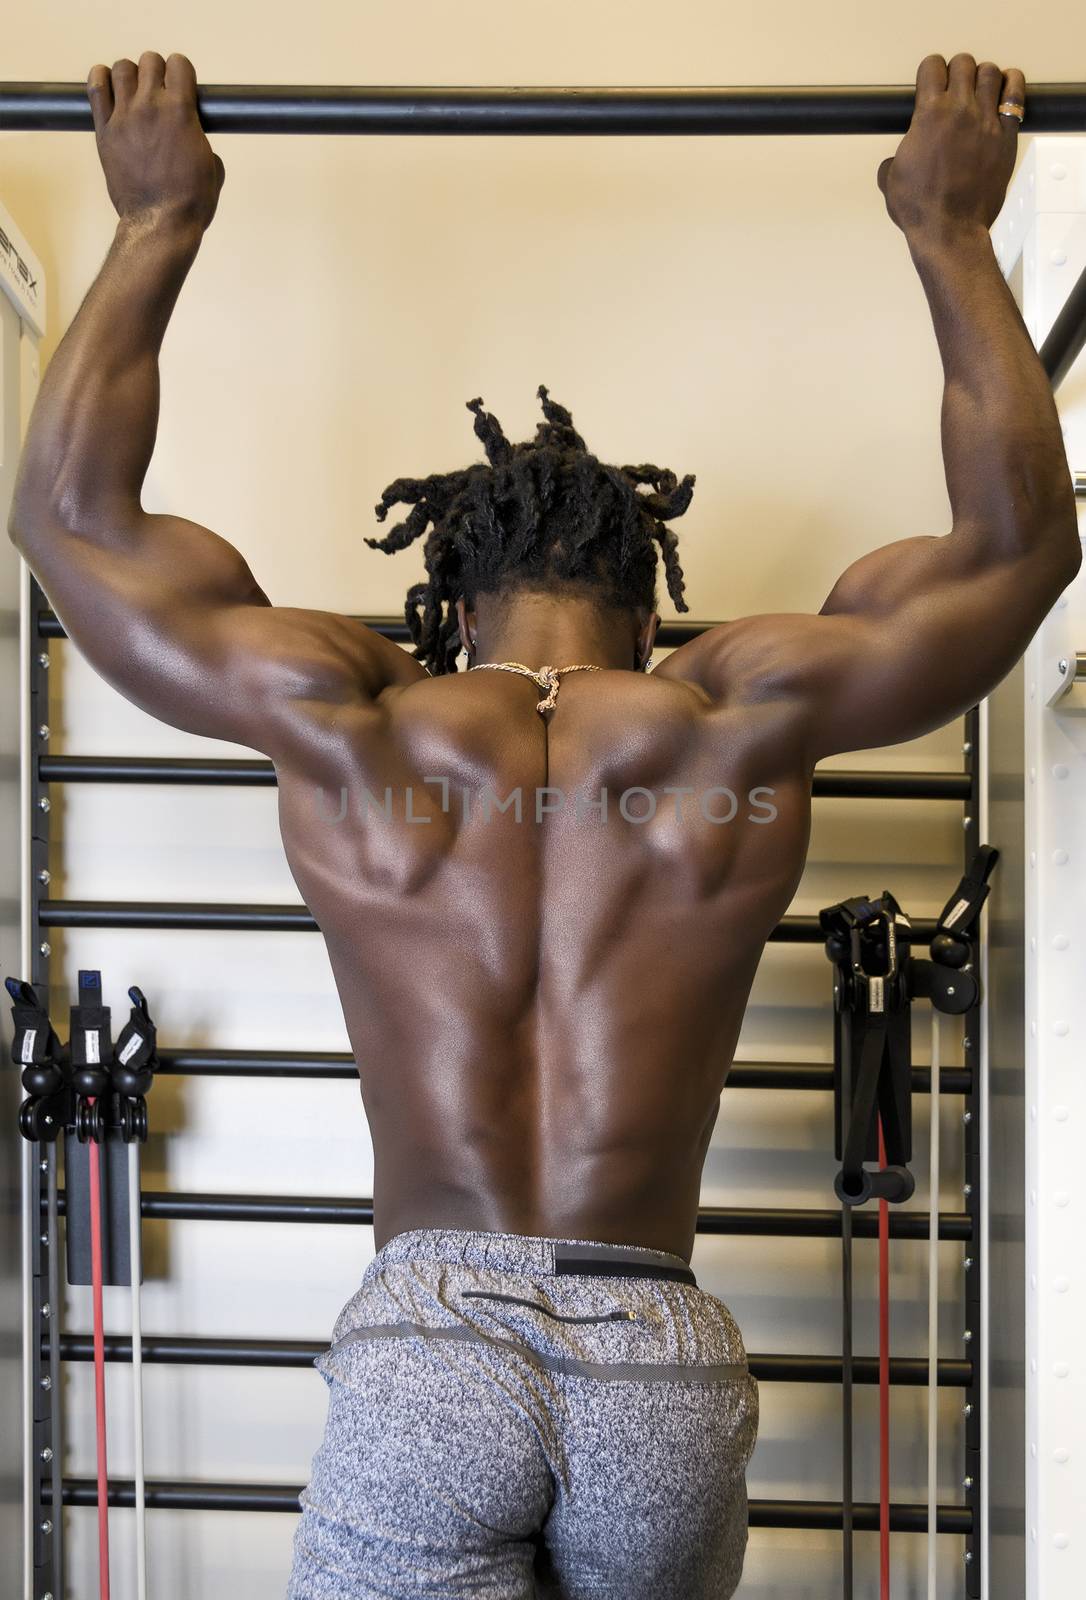 Handsome, young, muscular African American man, a bodybuilder, doing pull-ups in the gym.